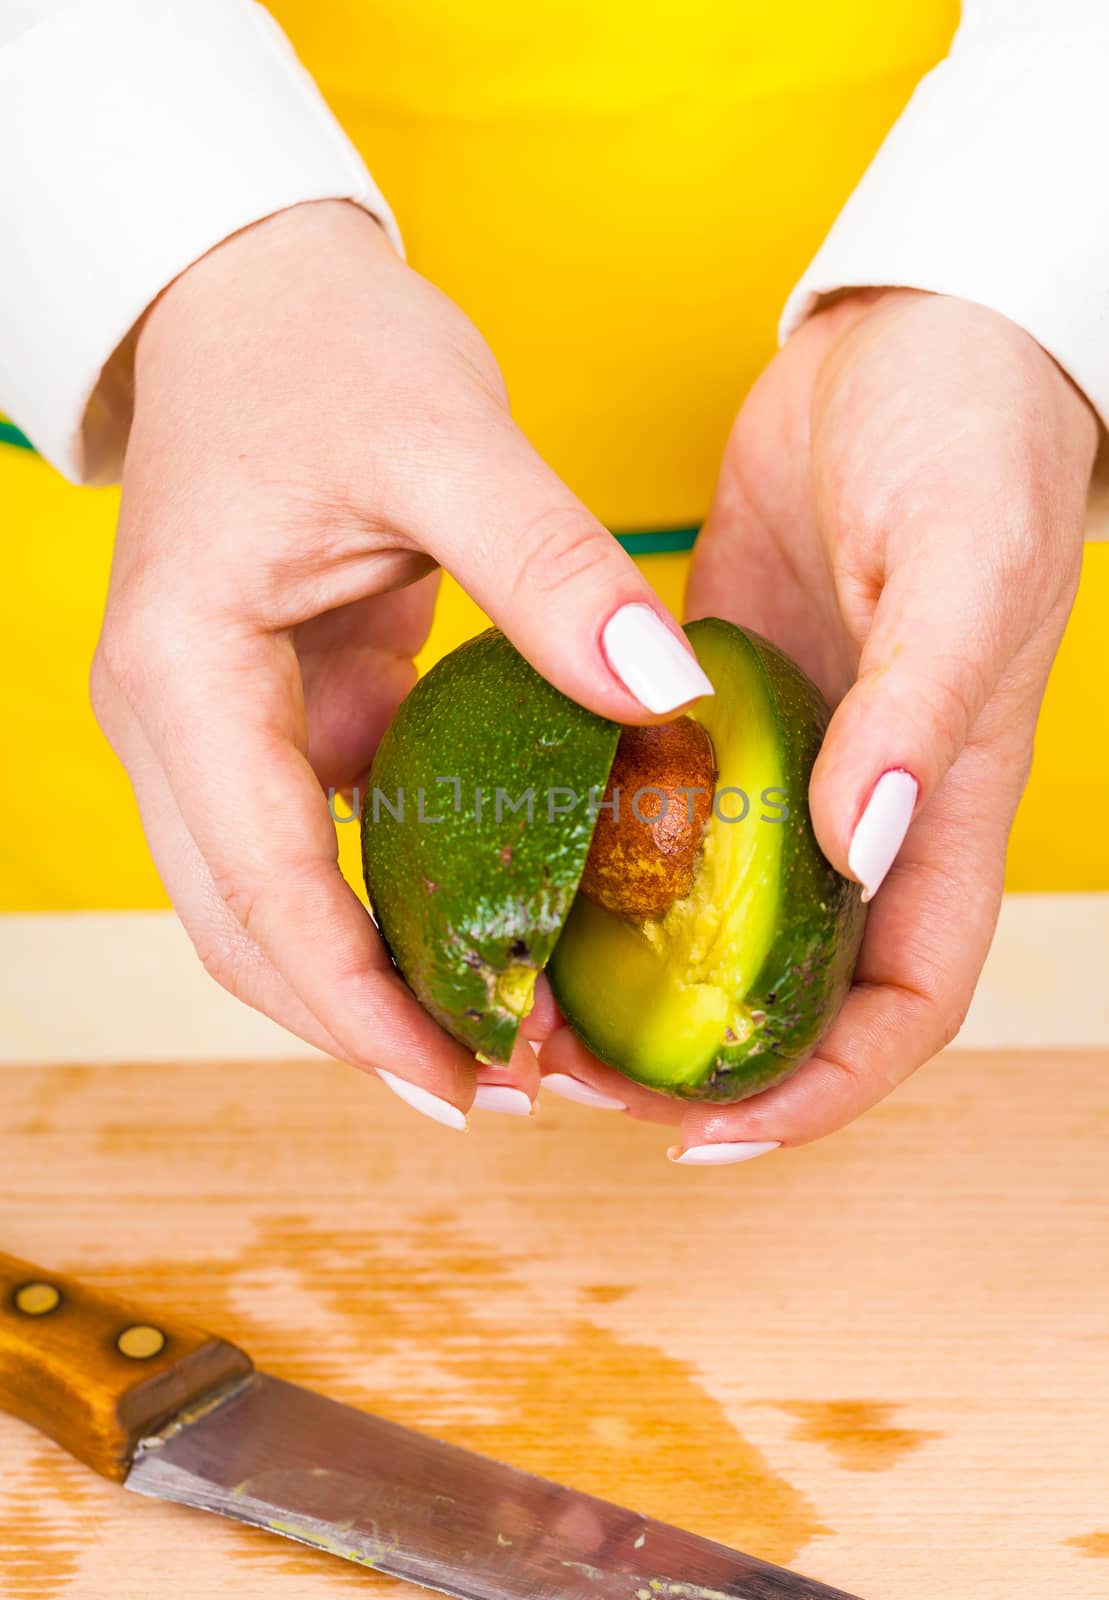 separates avocado into two parts on a wooden board